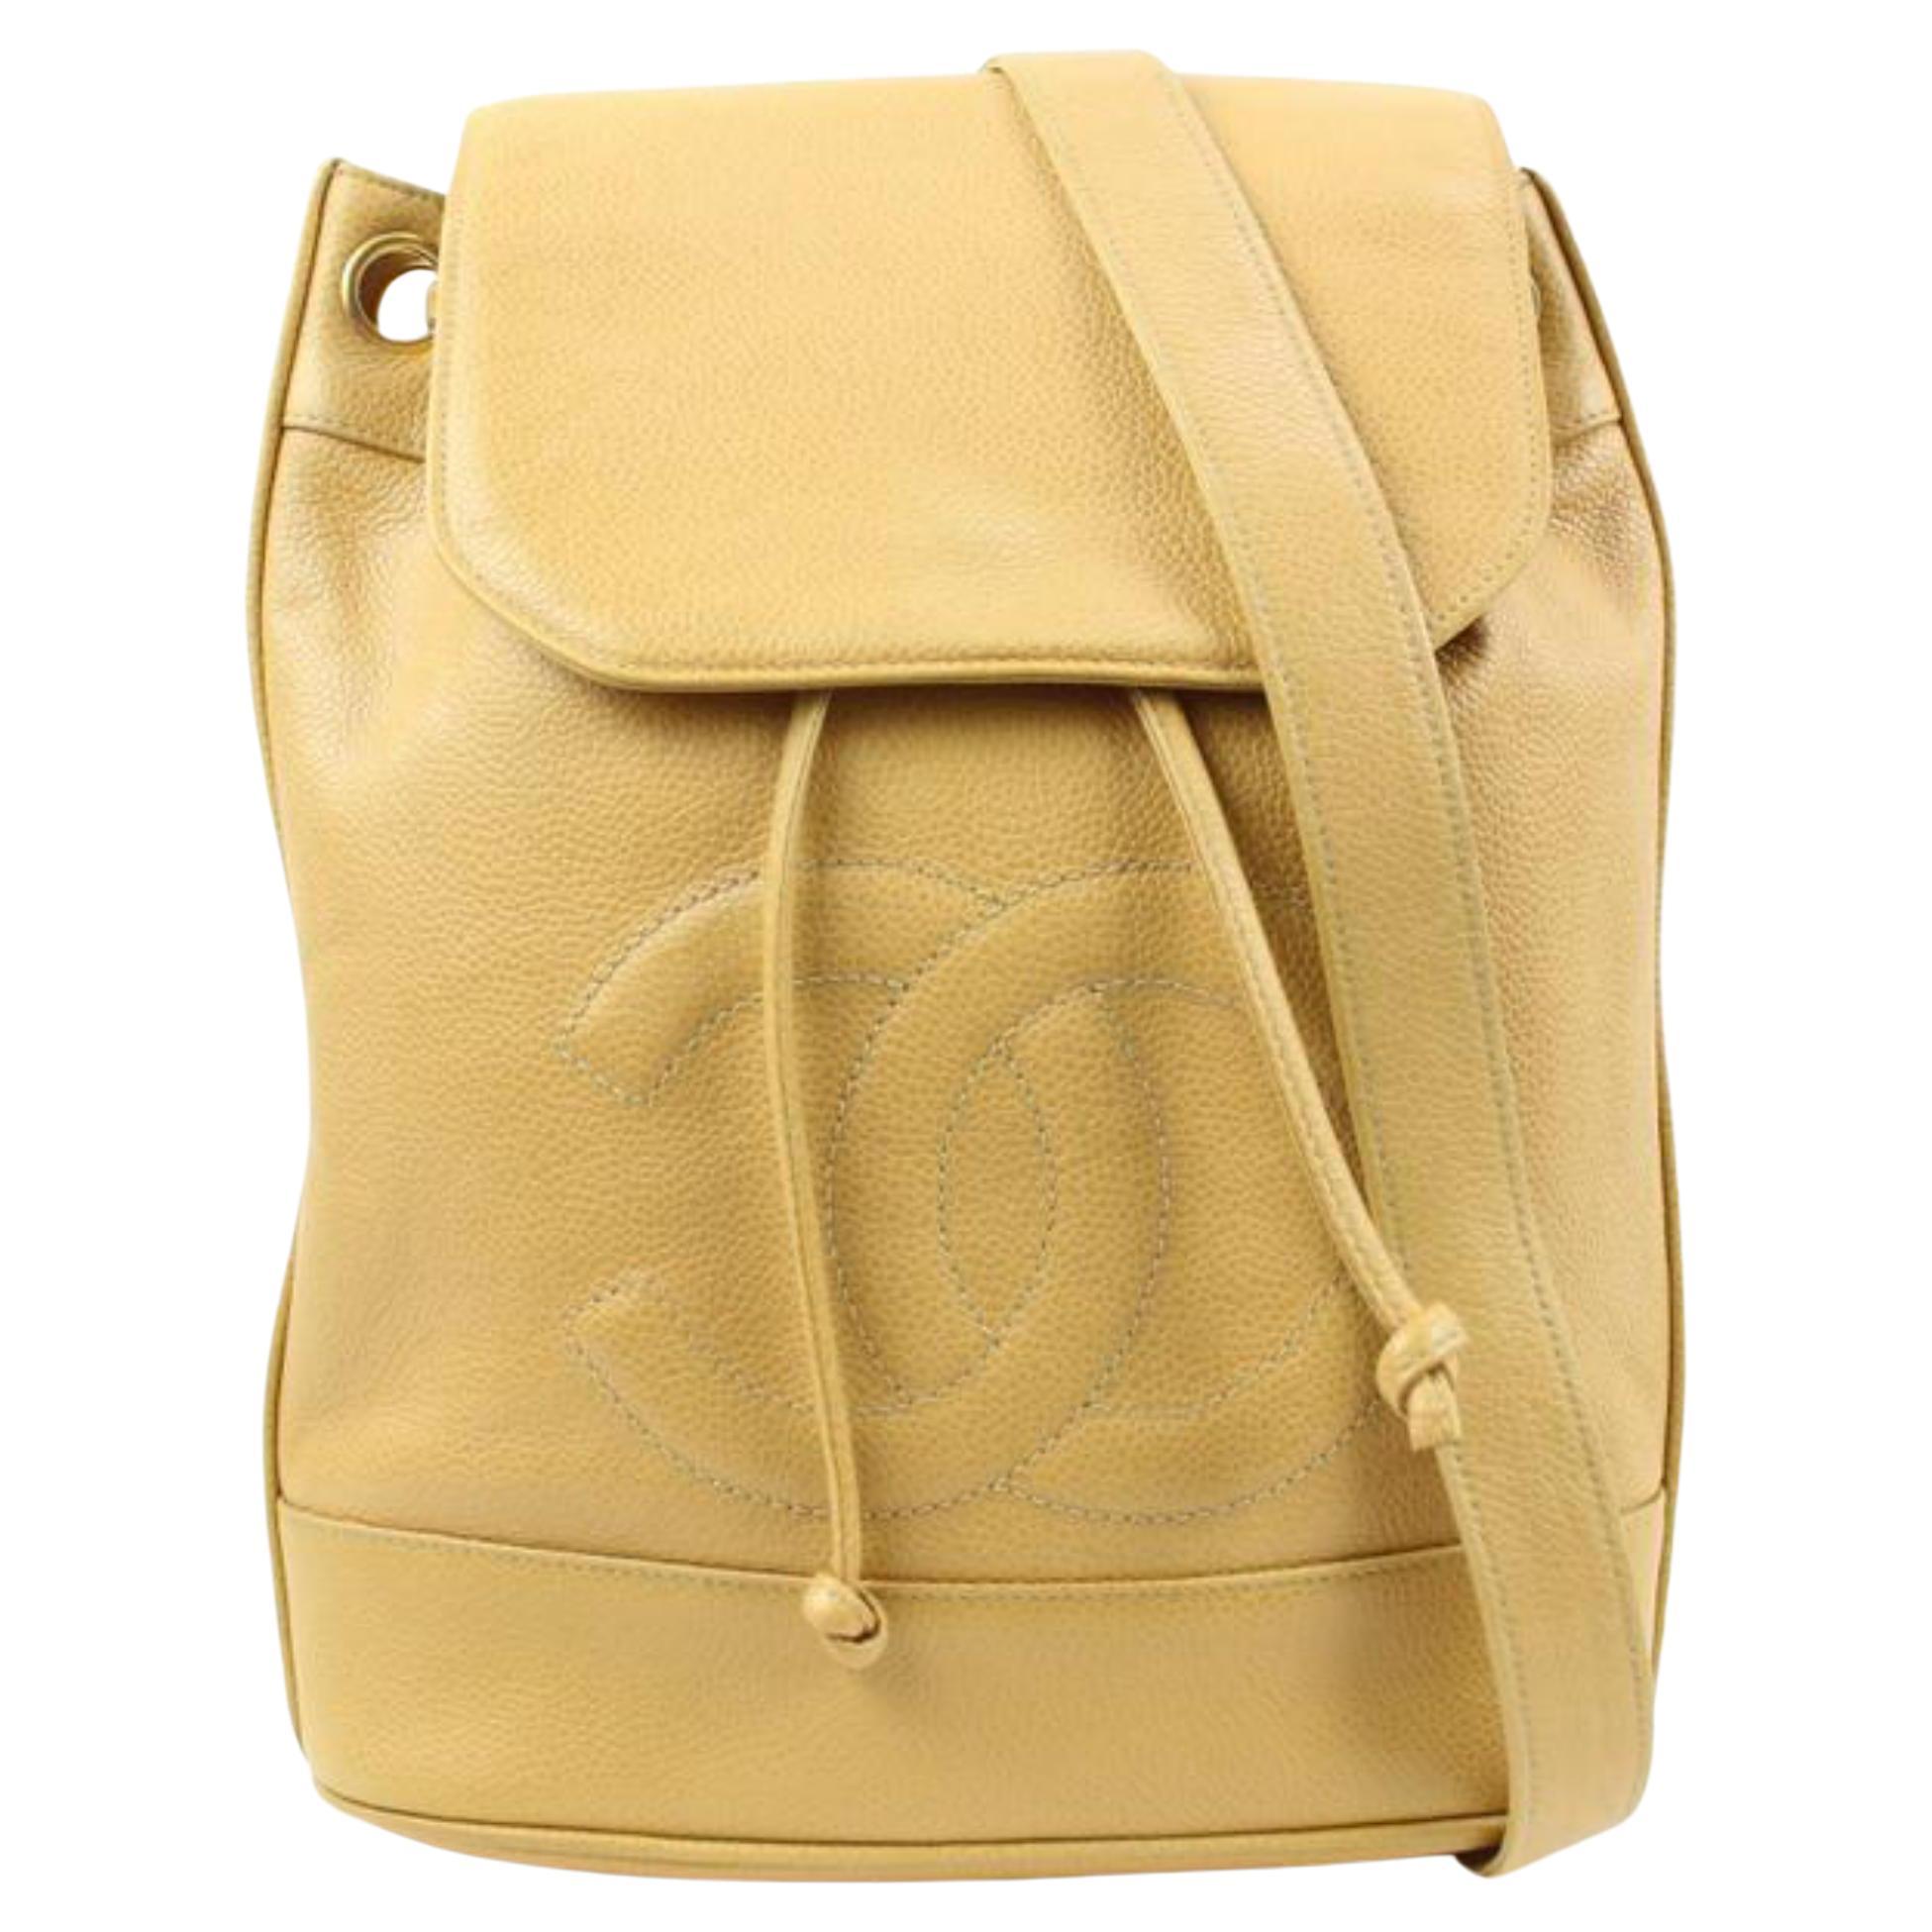 Chanel Beige Caviar Leather Sling Backpack with Pouch 59c128s